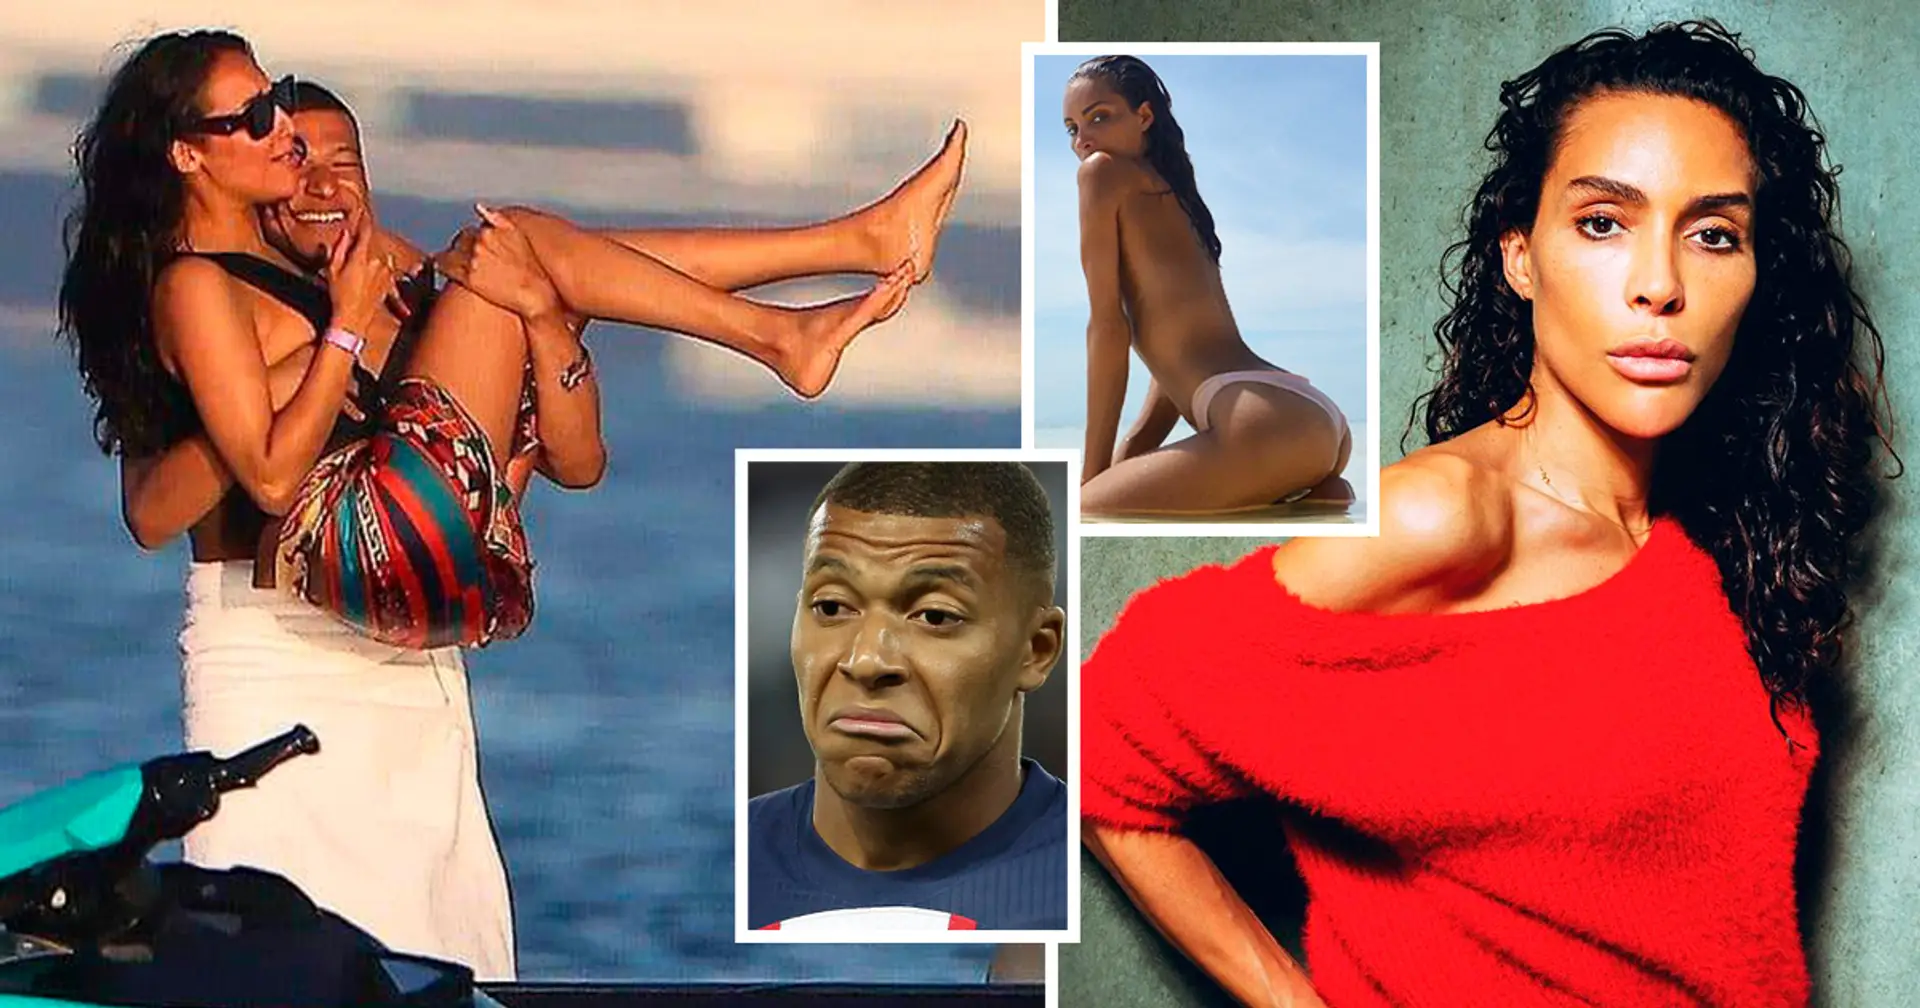 Kylian Mbappe reportedly dating trans model Ines Rau, the first transgender woman to appear on Playboy cover